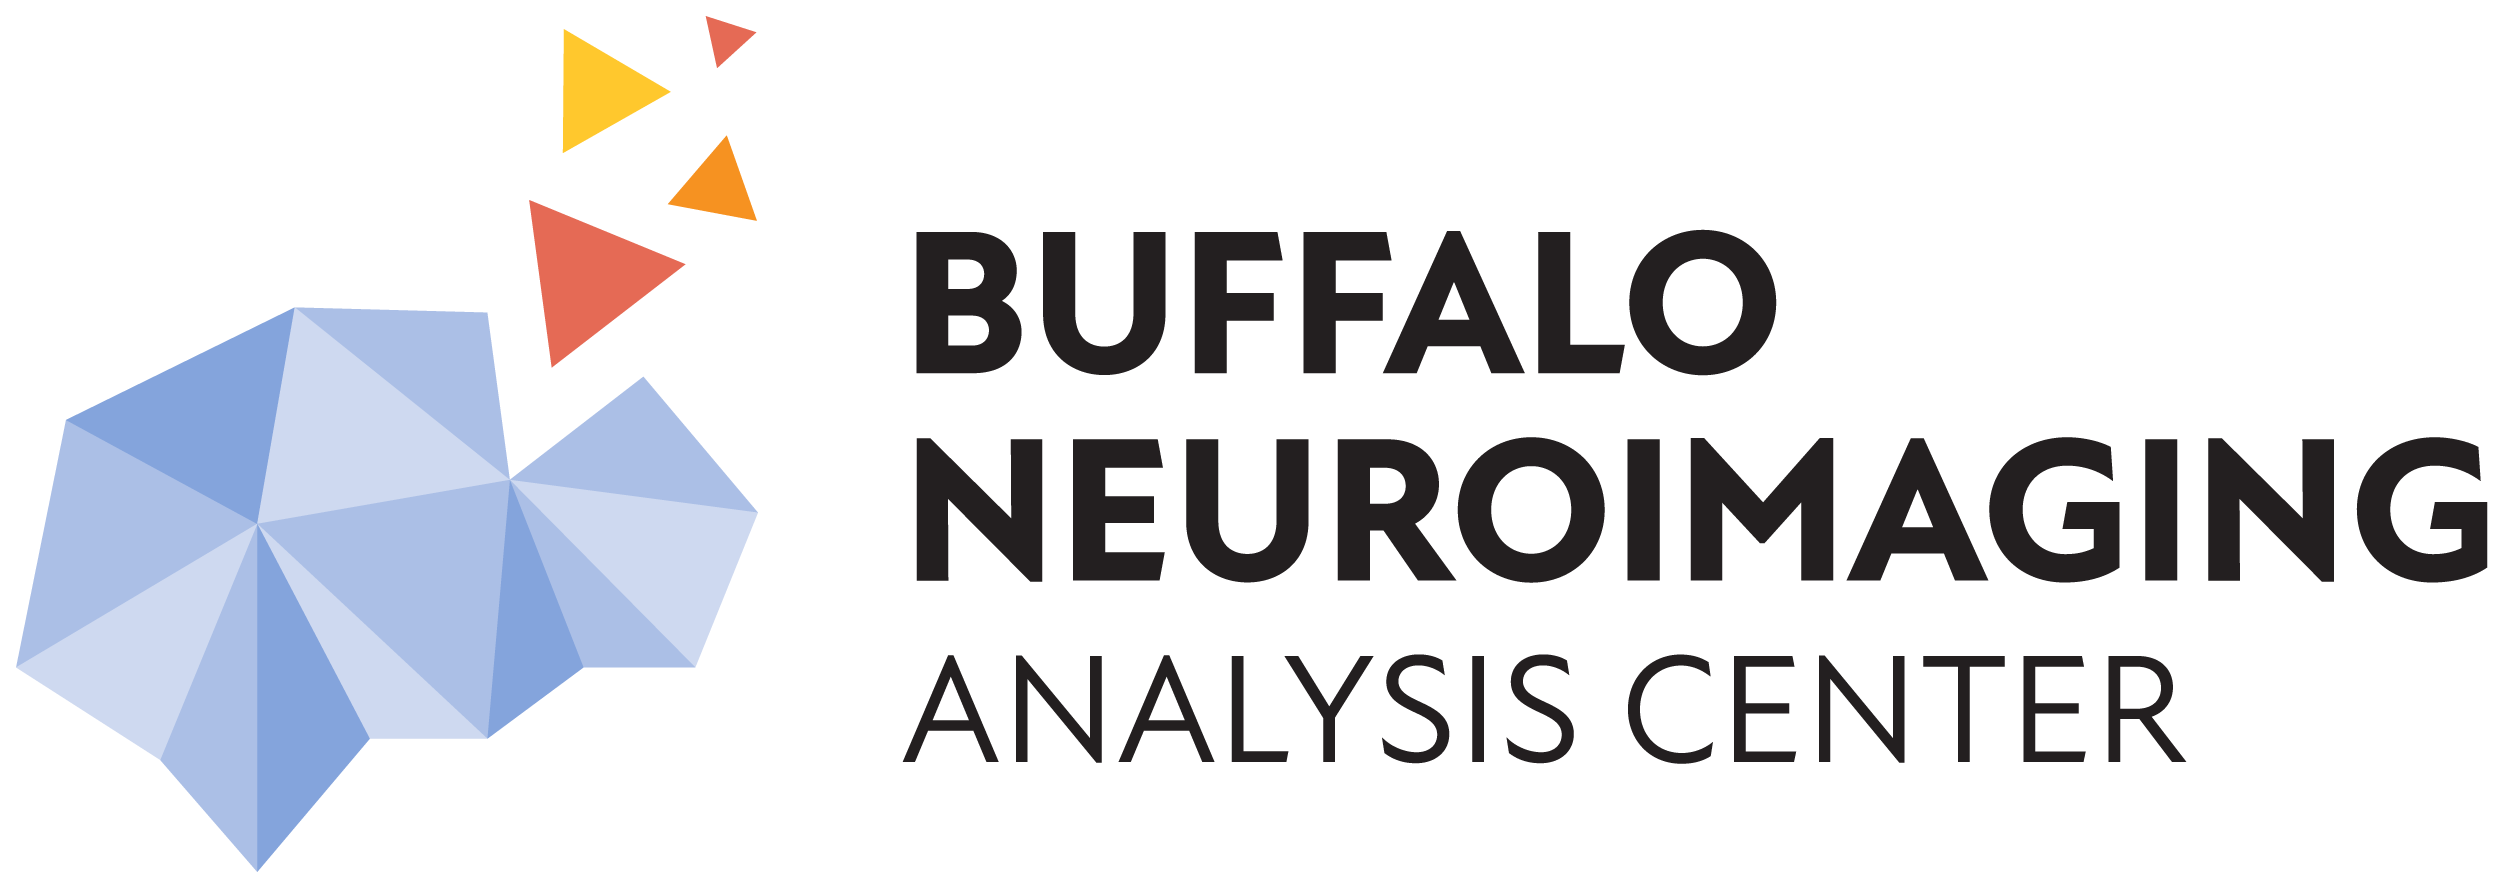 UB’s Buffalo Neuroimaging Analysis Center Receives $100,000 Challenge Grant to Study Advanced Multiple Sclerosis Image